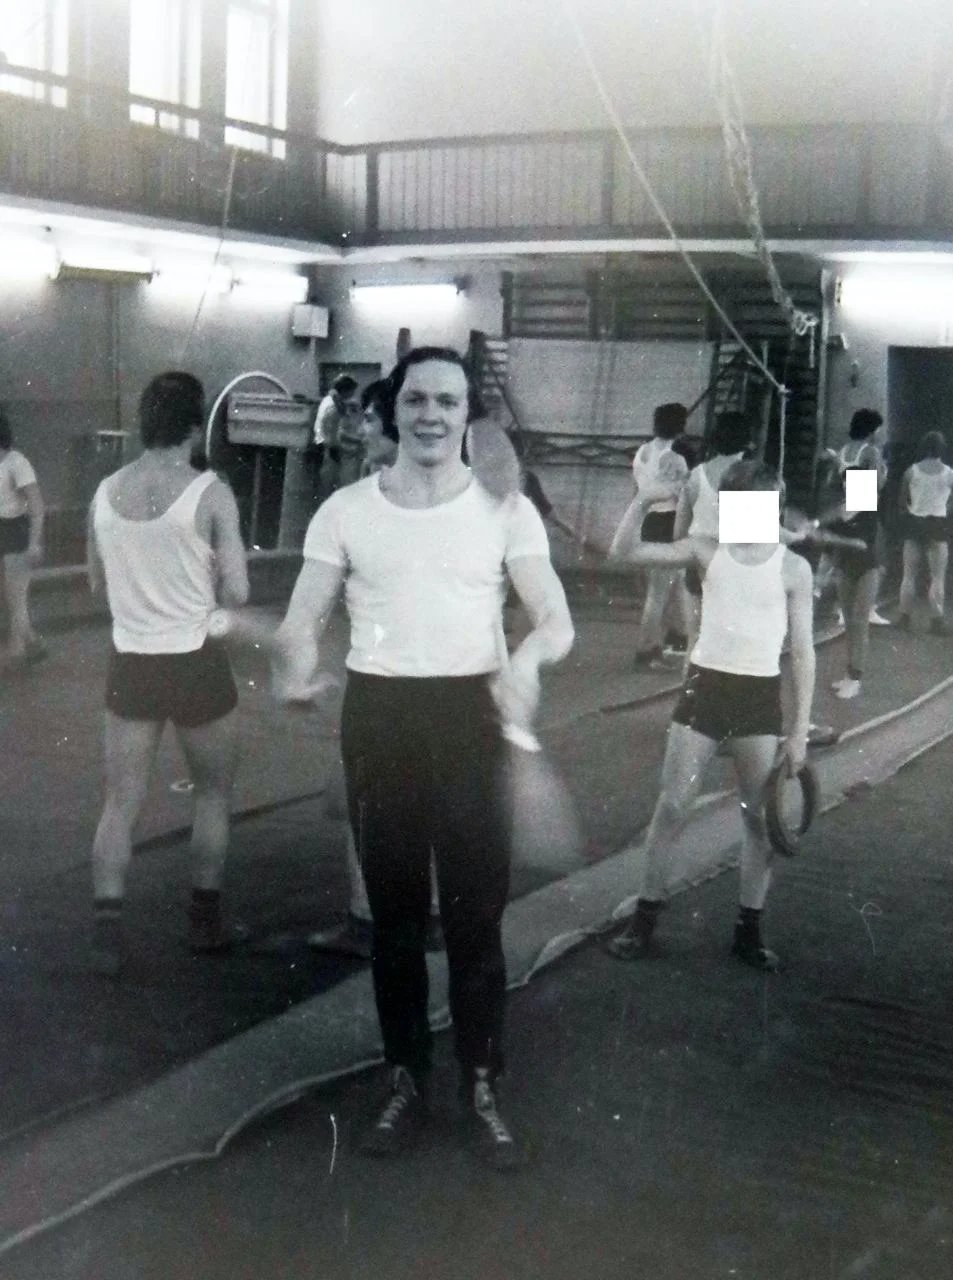 Mikhail Zhukov practicing at the State Circus and Variety Art School, 1980. Photo contributed by Alexander Zhukov